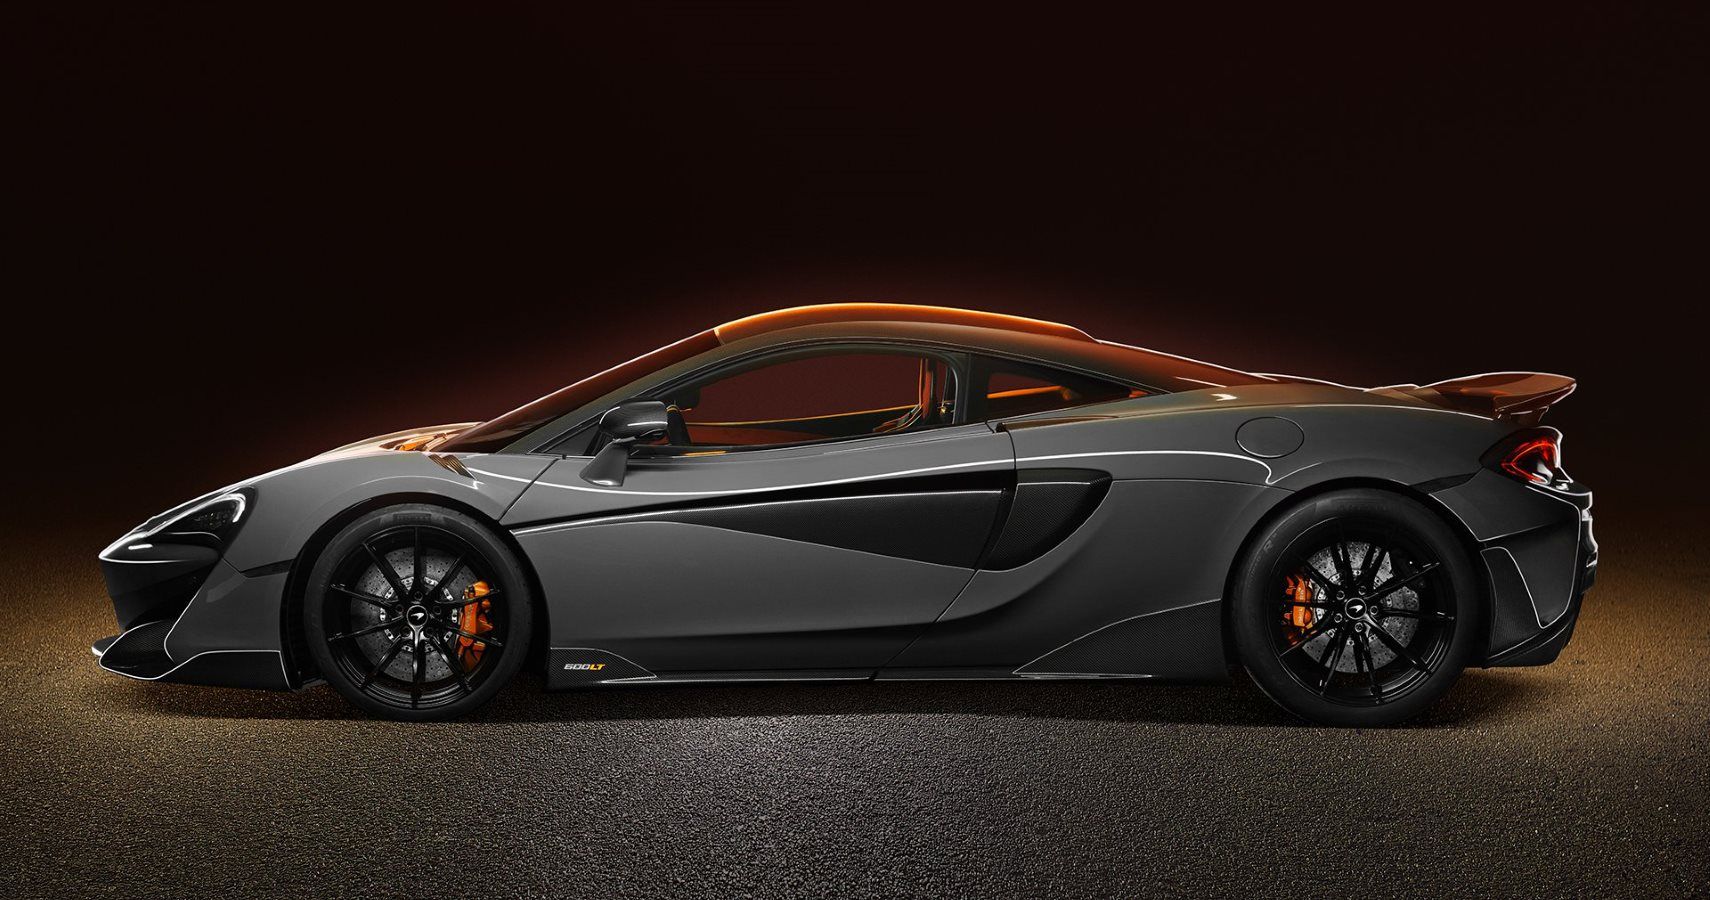 What's It Like Driving A McLaren 600LT? Top Gear Finds Out